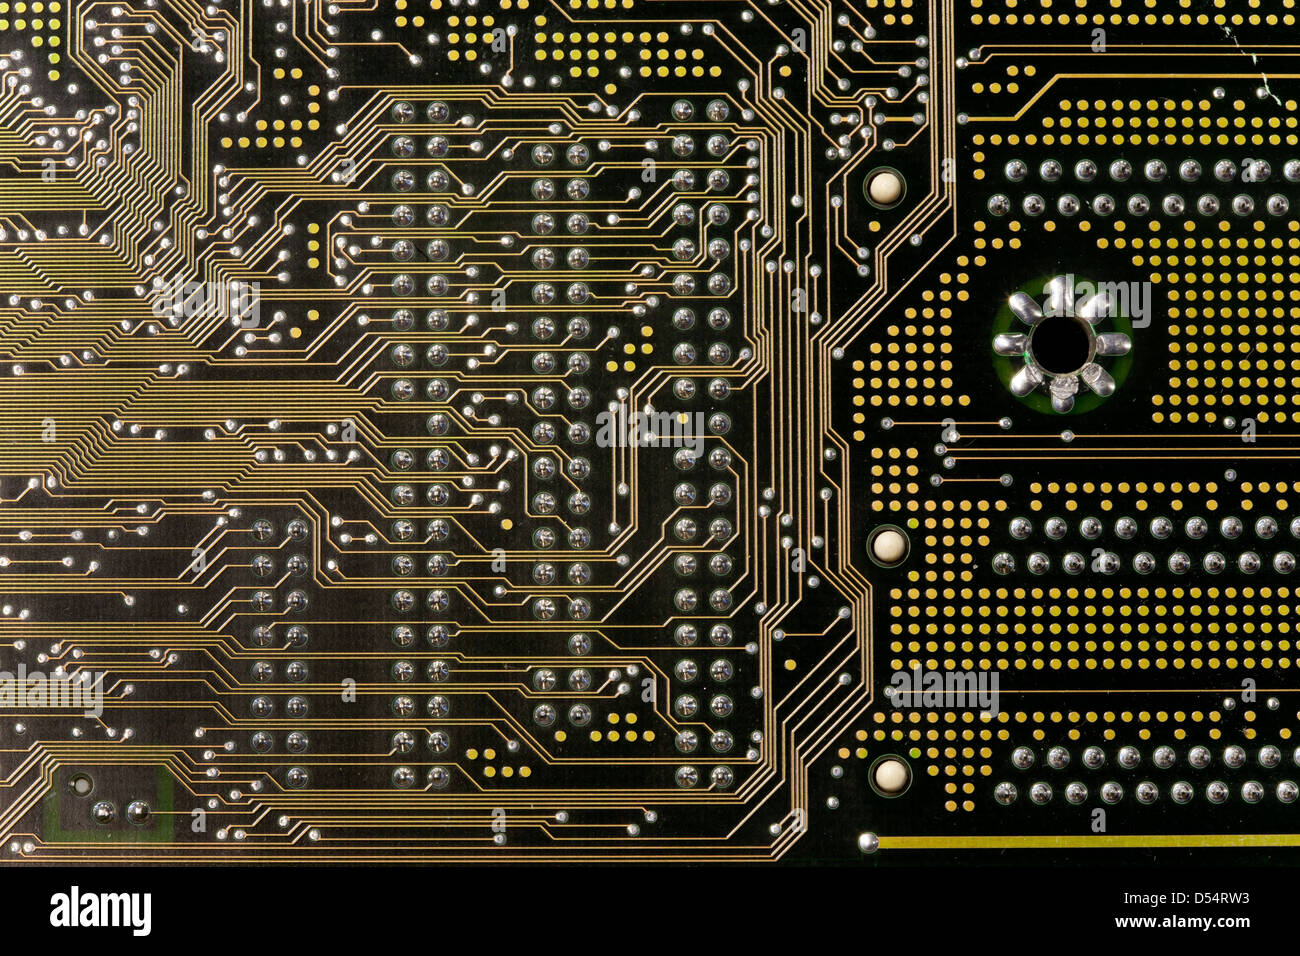 Berlin, Germany, Close-up of a circuit board Stock Photo